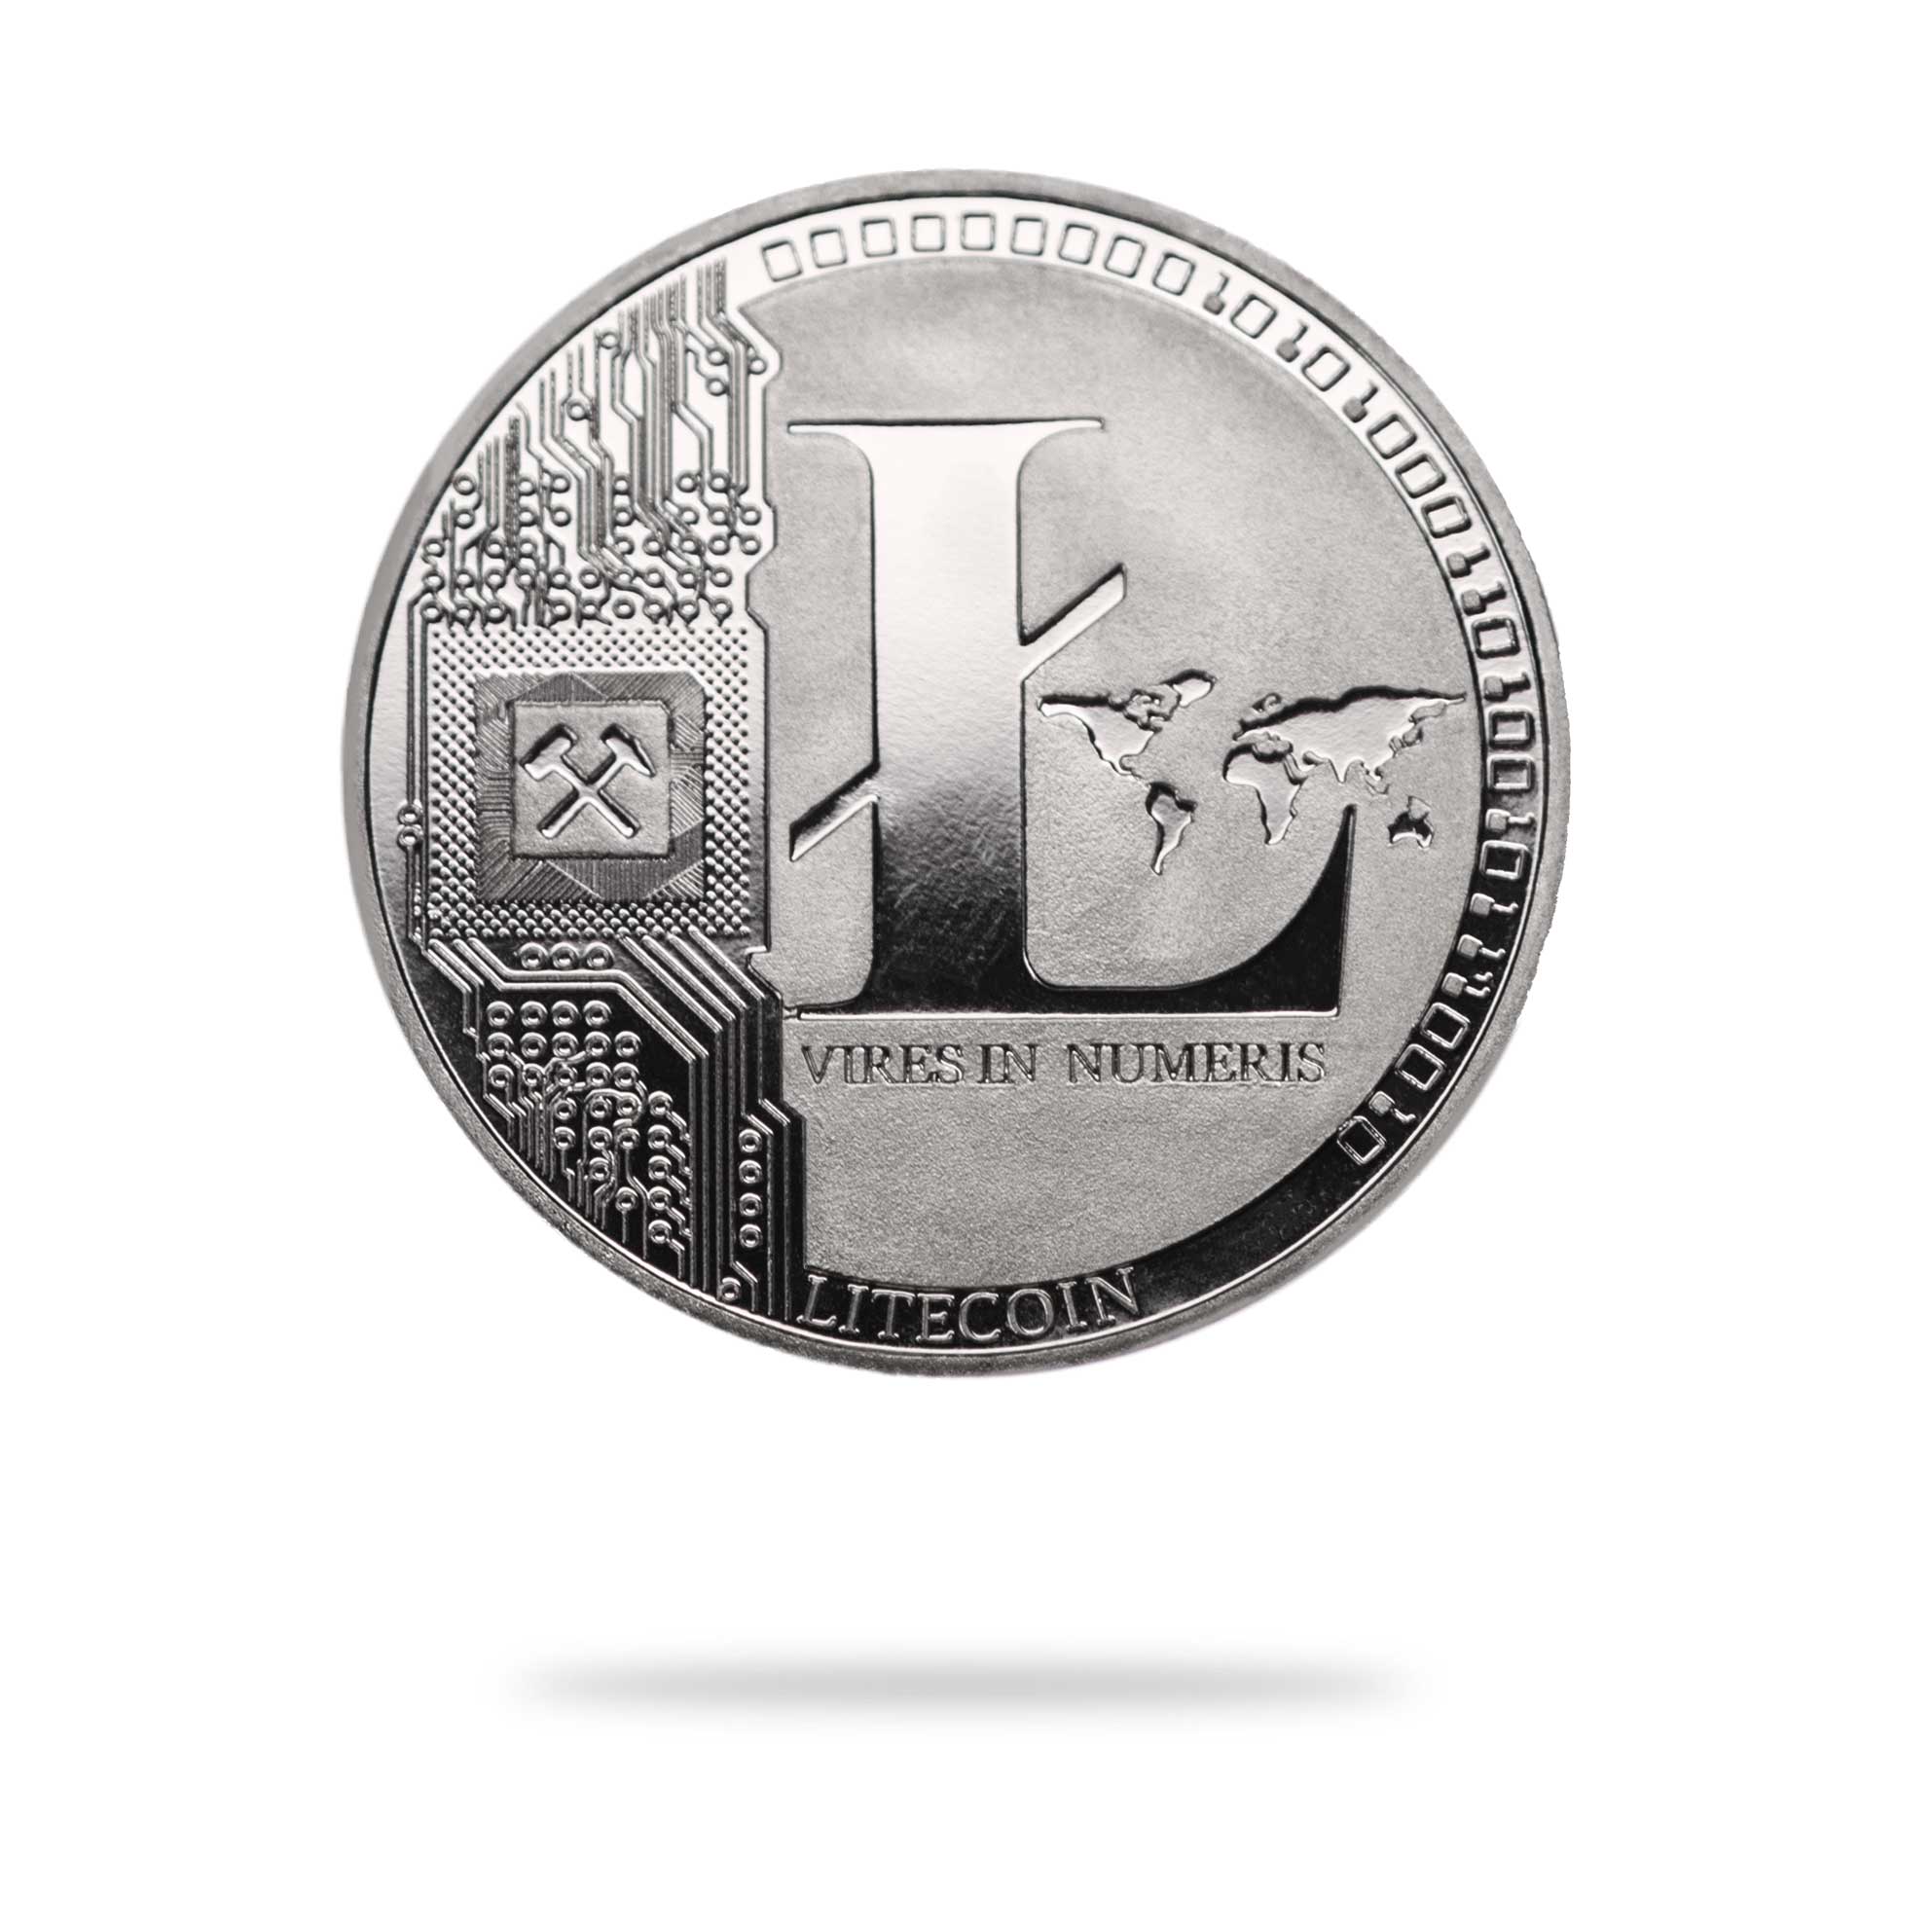 Cryptochips | Litecoin Physical Crypto Coin. Collectable cryptocurrency merch you can hodl